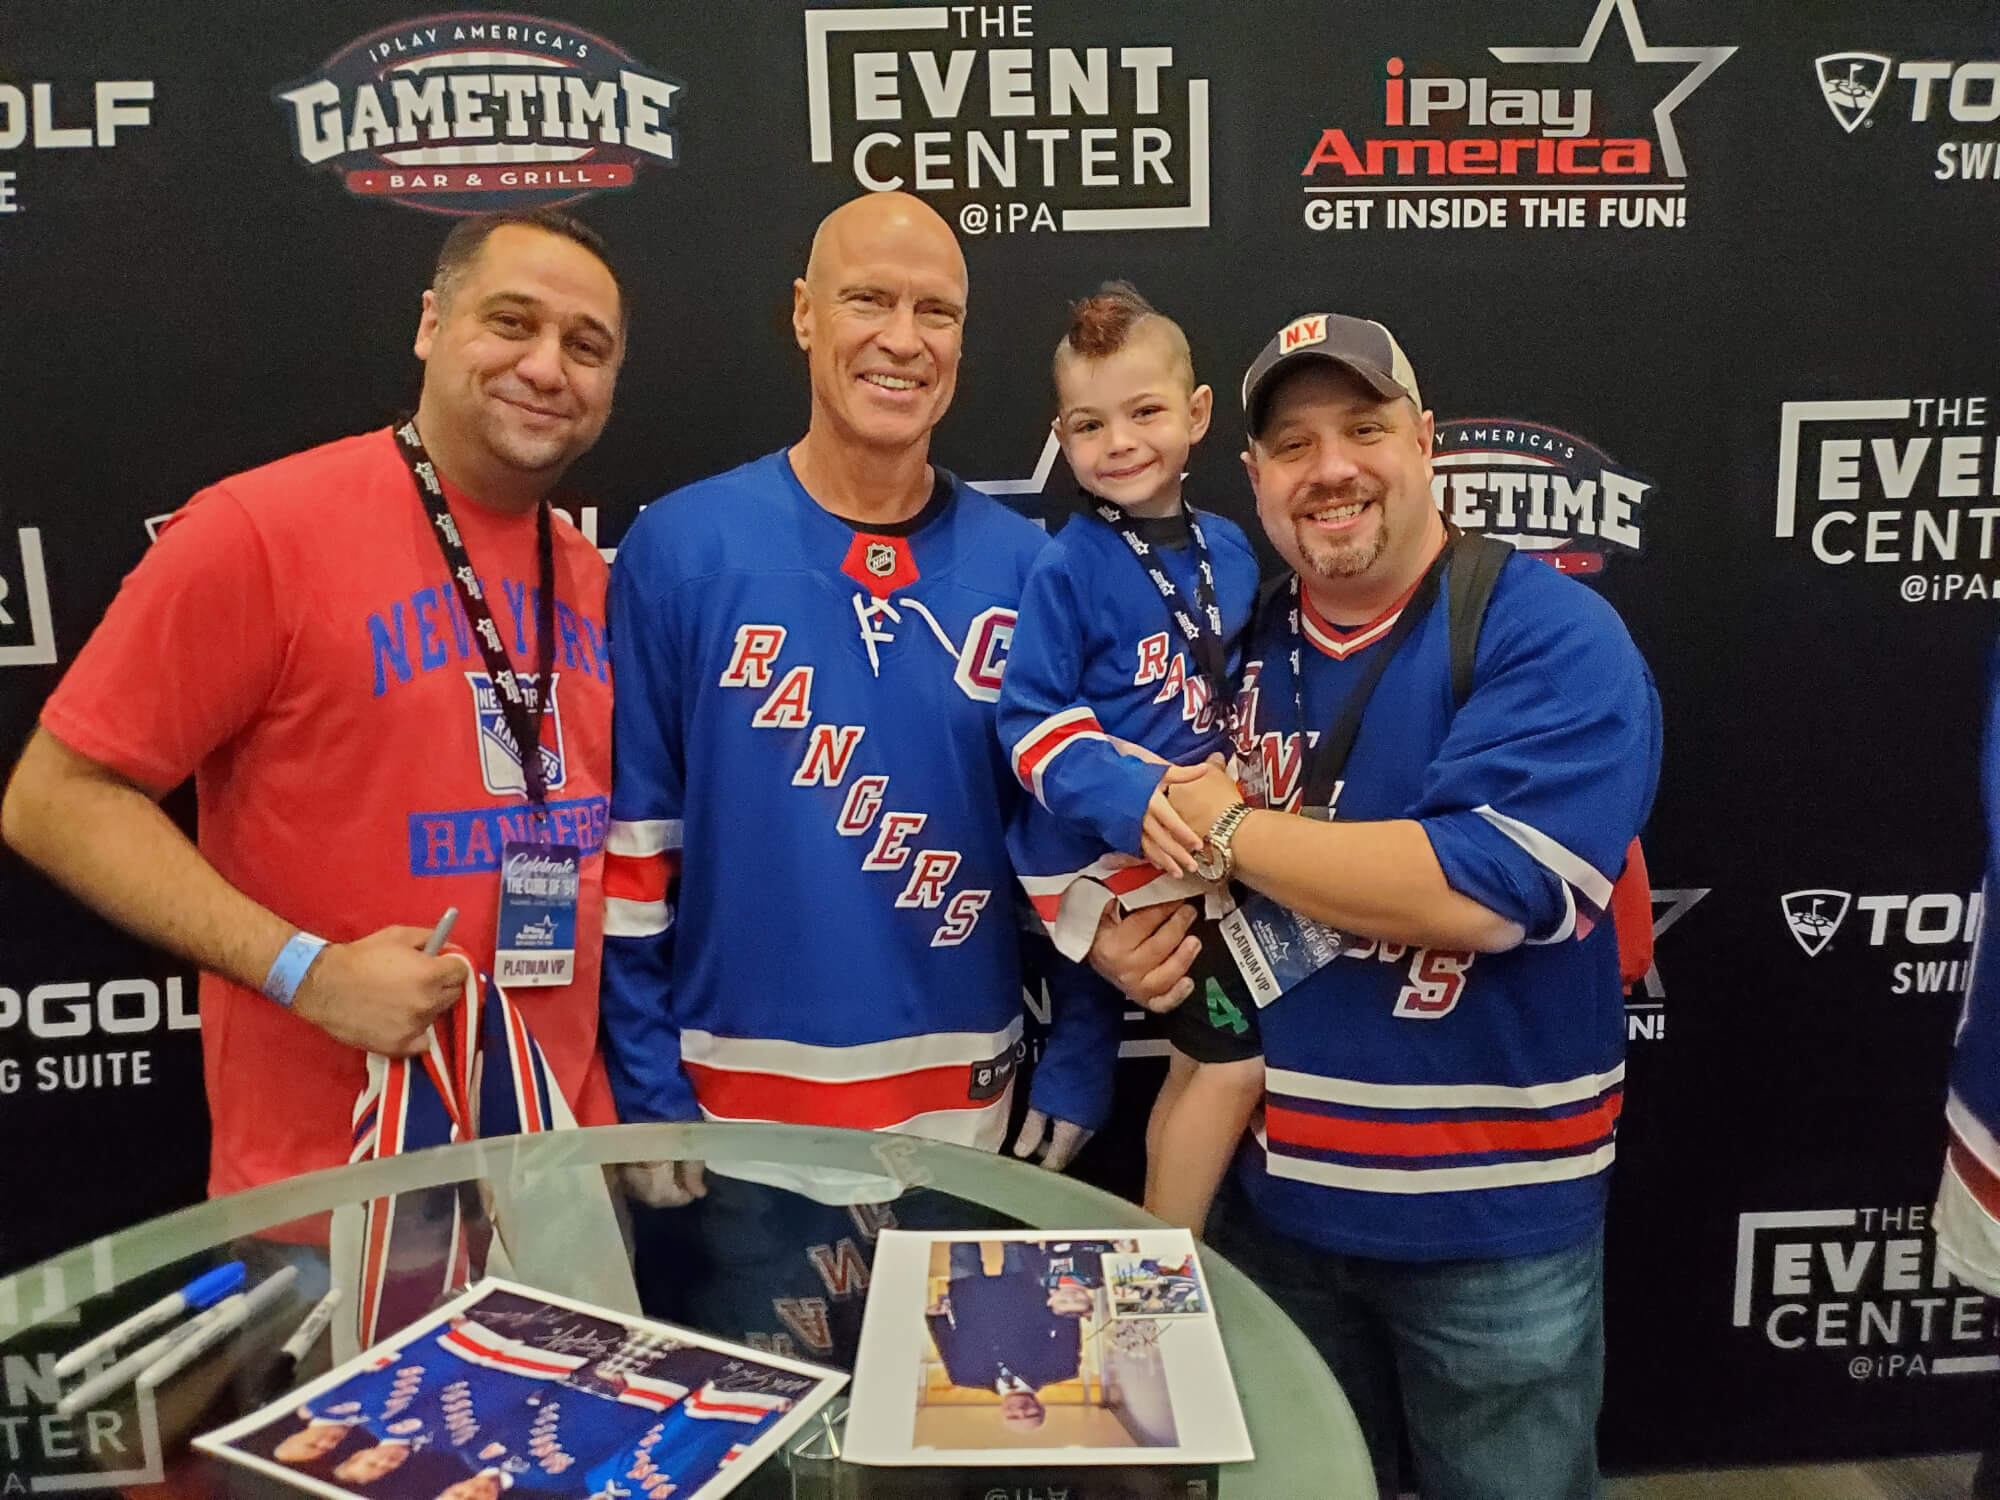 Celebrate 25 Years with Members of the New York Rangers 1994